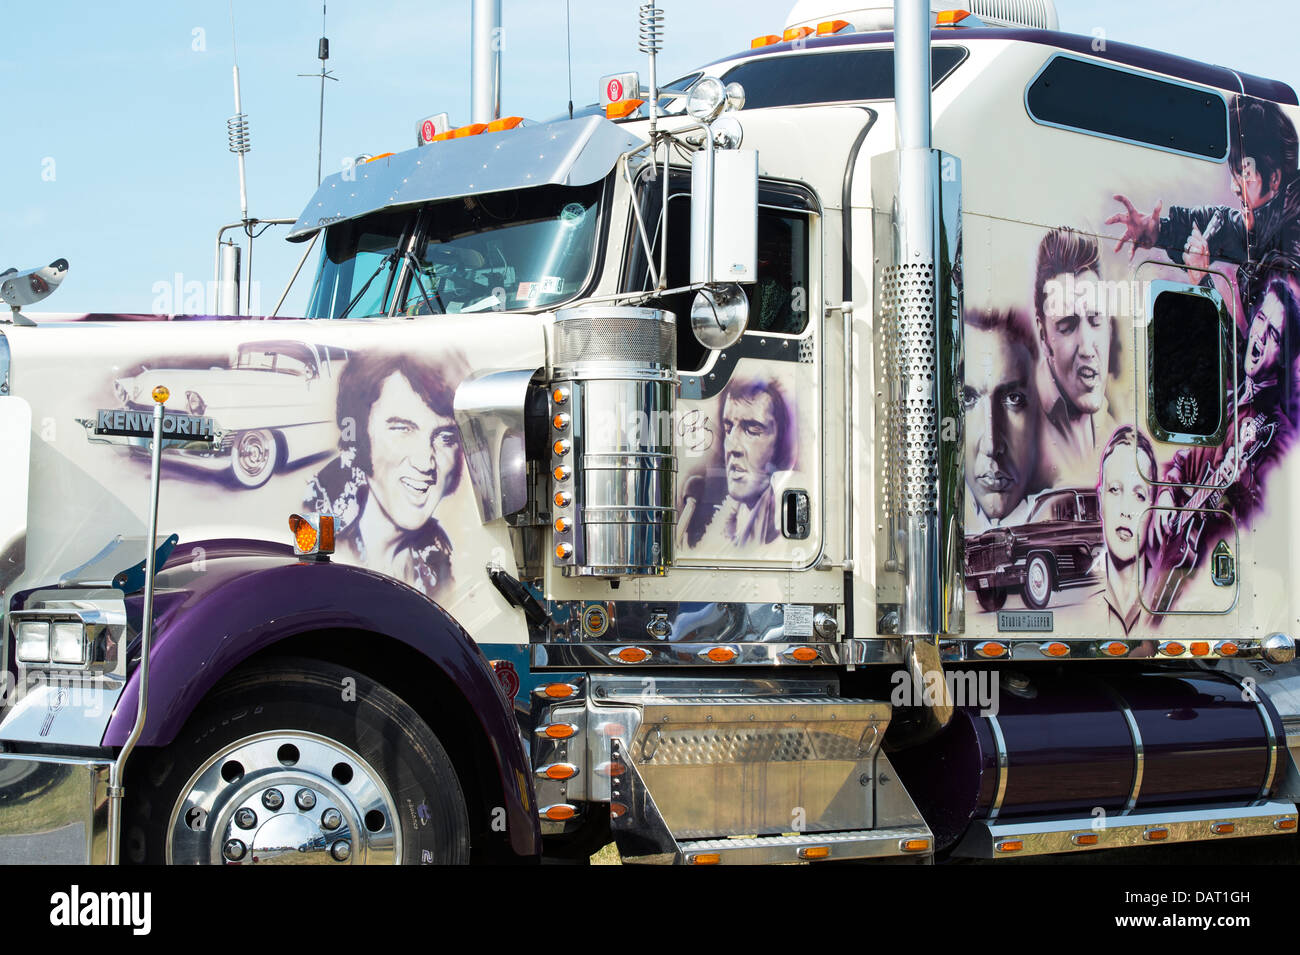 Custom American truck painted with Elvis artwork at an American car show. UK Stock Photo